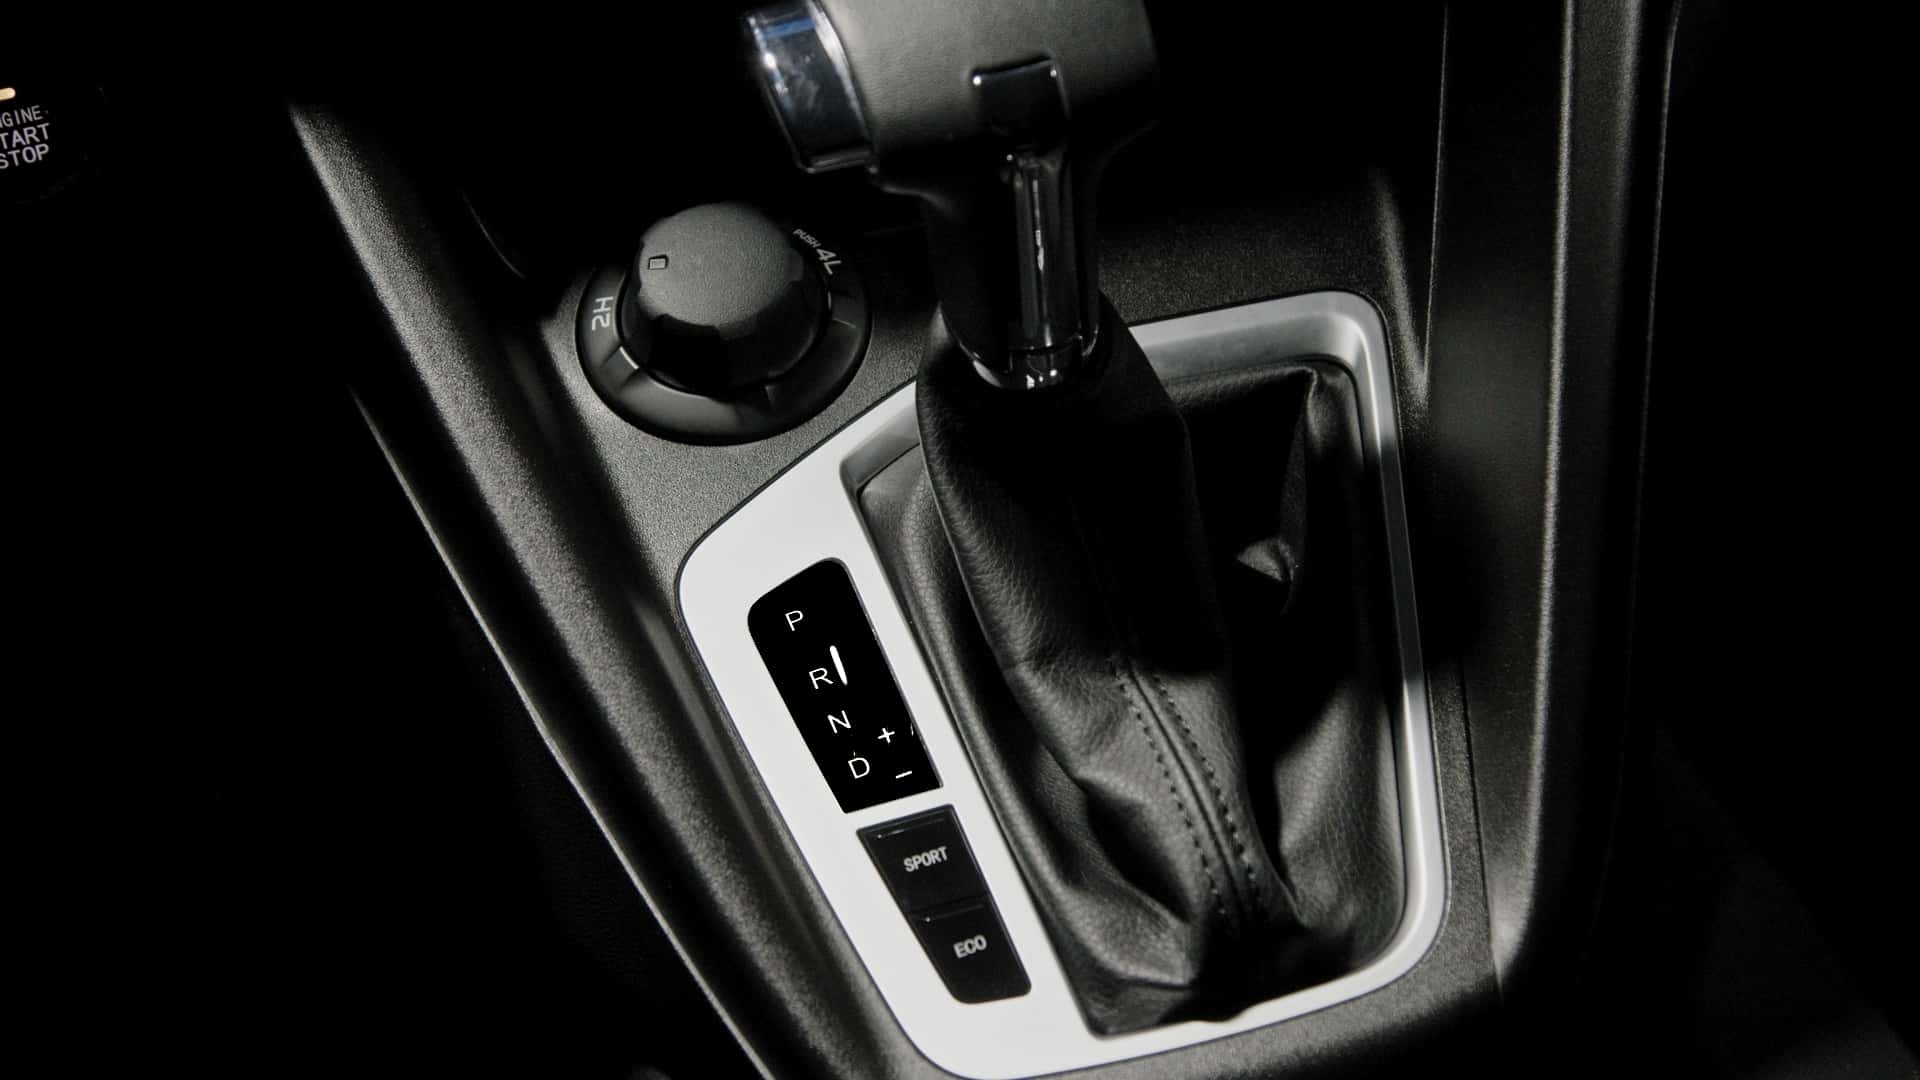 The gearbox on the center console of the new Fiat Titano based on the Peugeot Landtrek pickup.